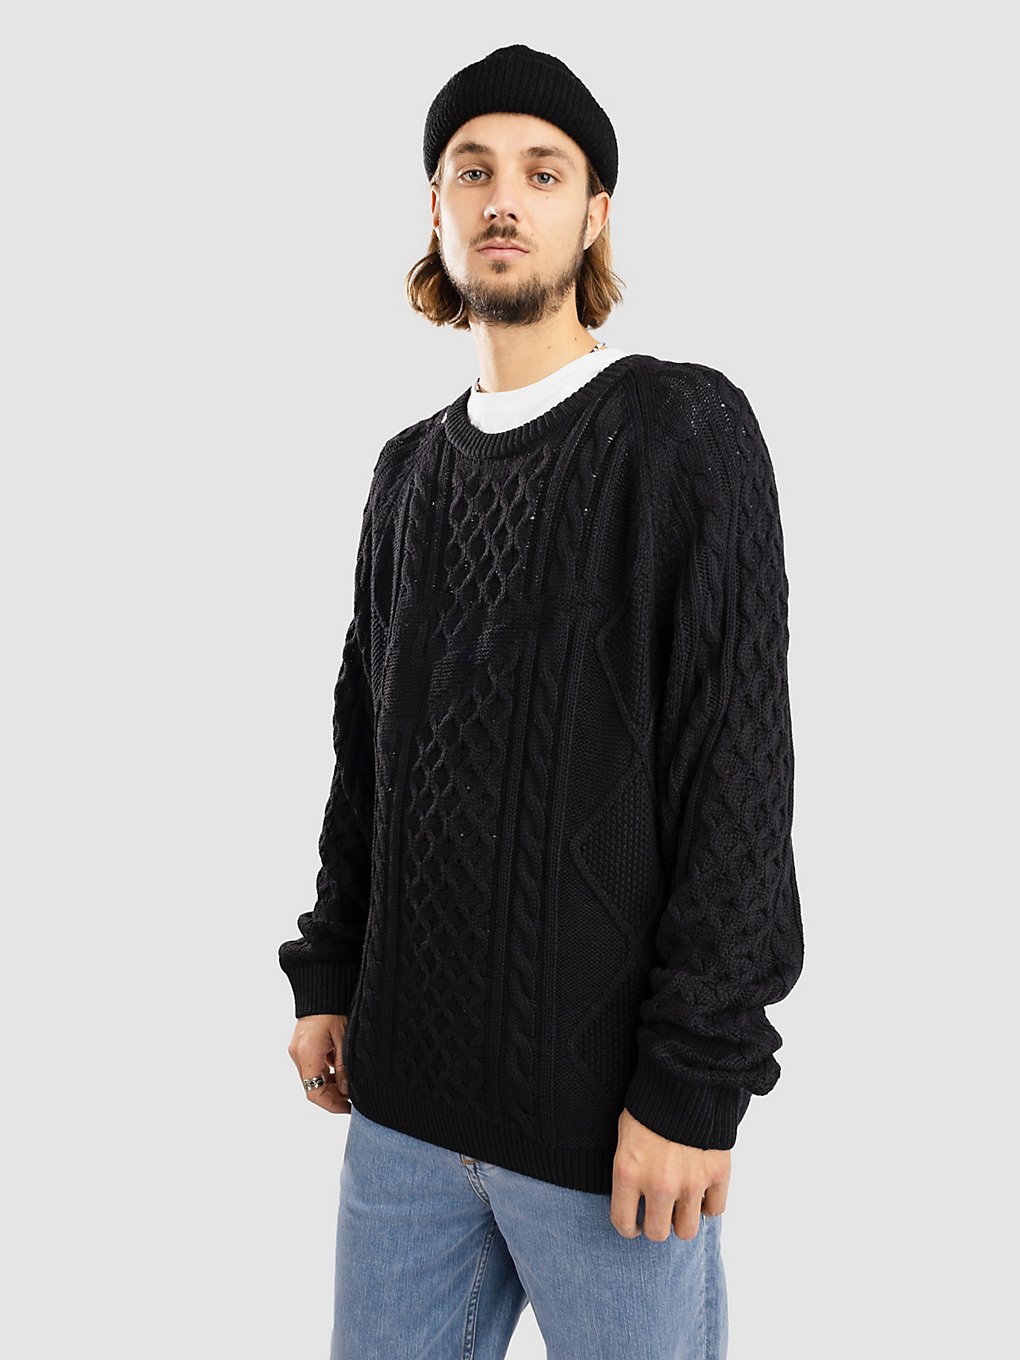 Nike Life Cable Knit Pullover black kaufen